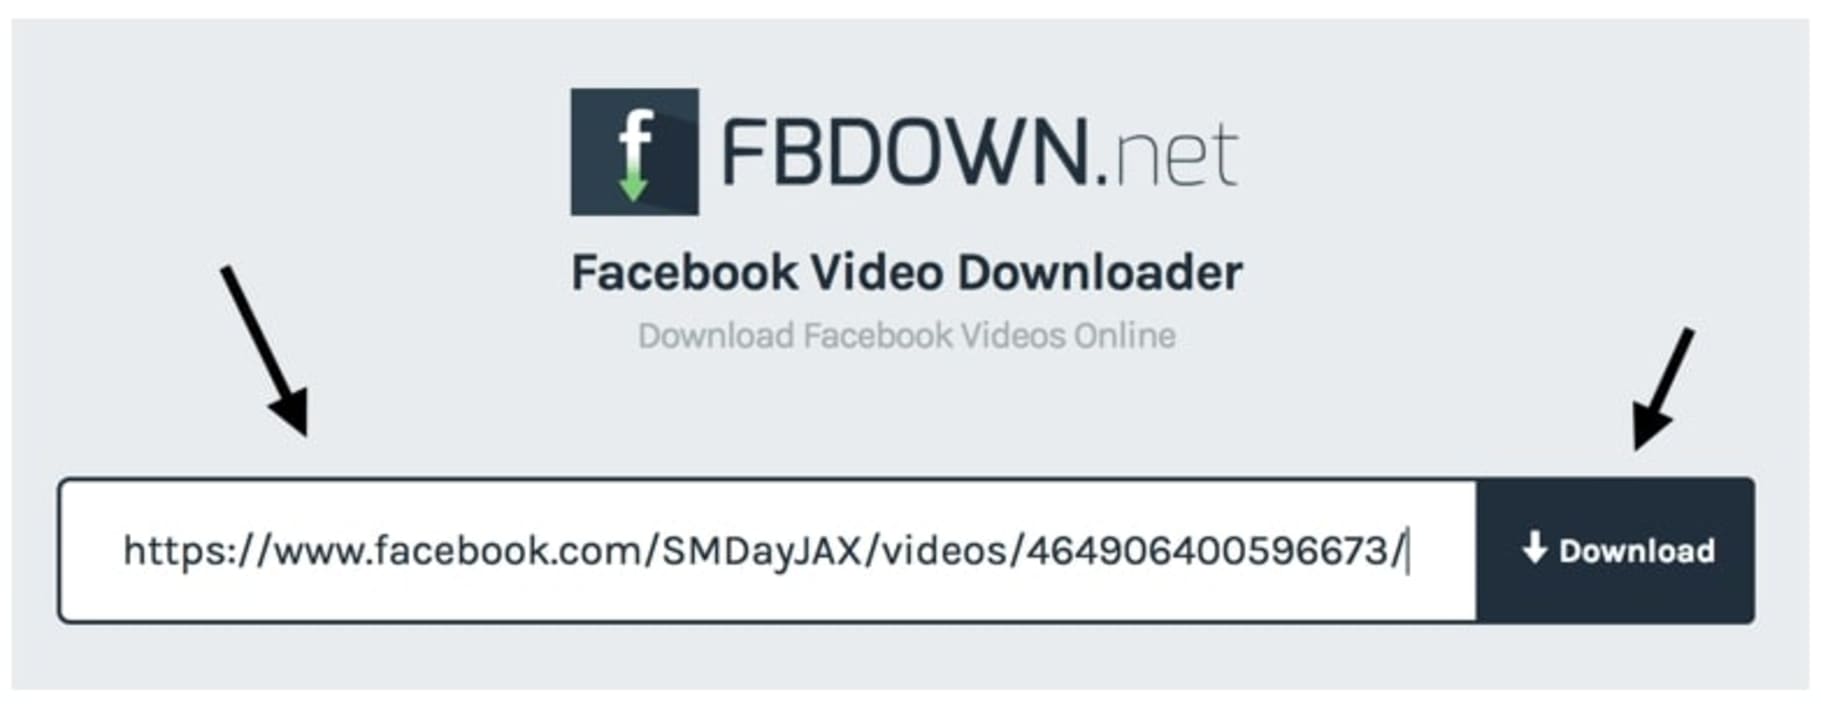 What Is a Facebook Video Downloader and How to Use It